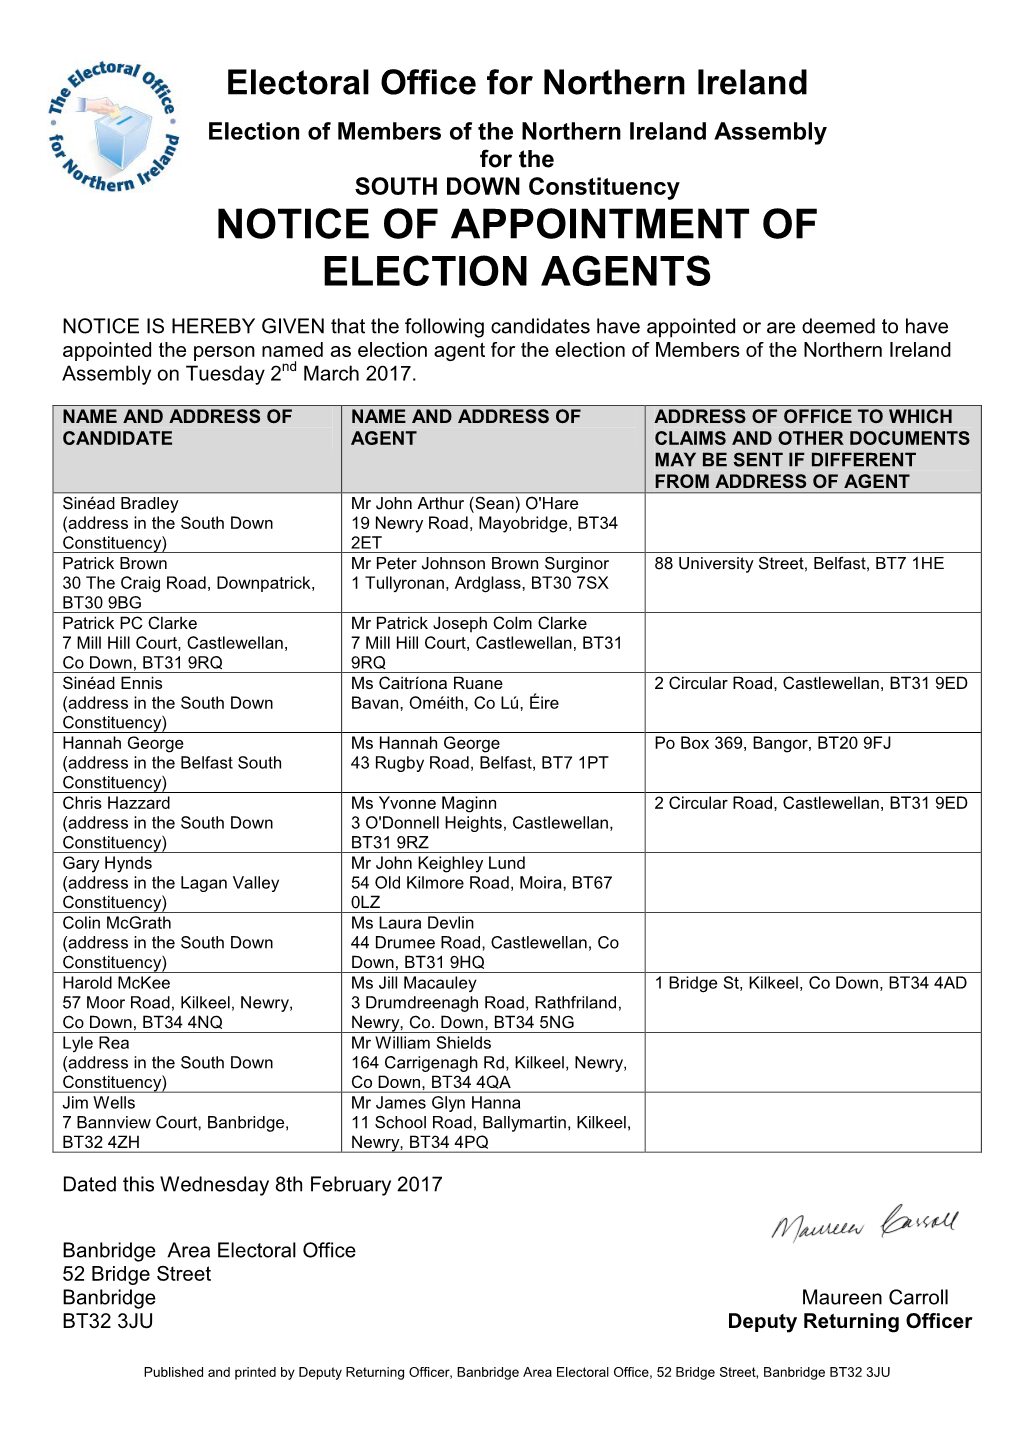 Notice of Appointment of Election Agents